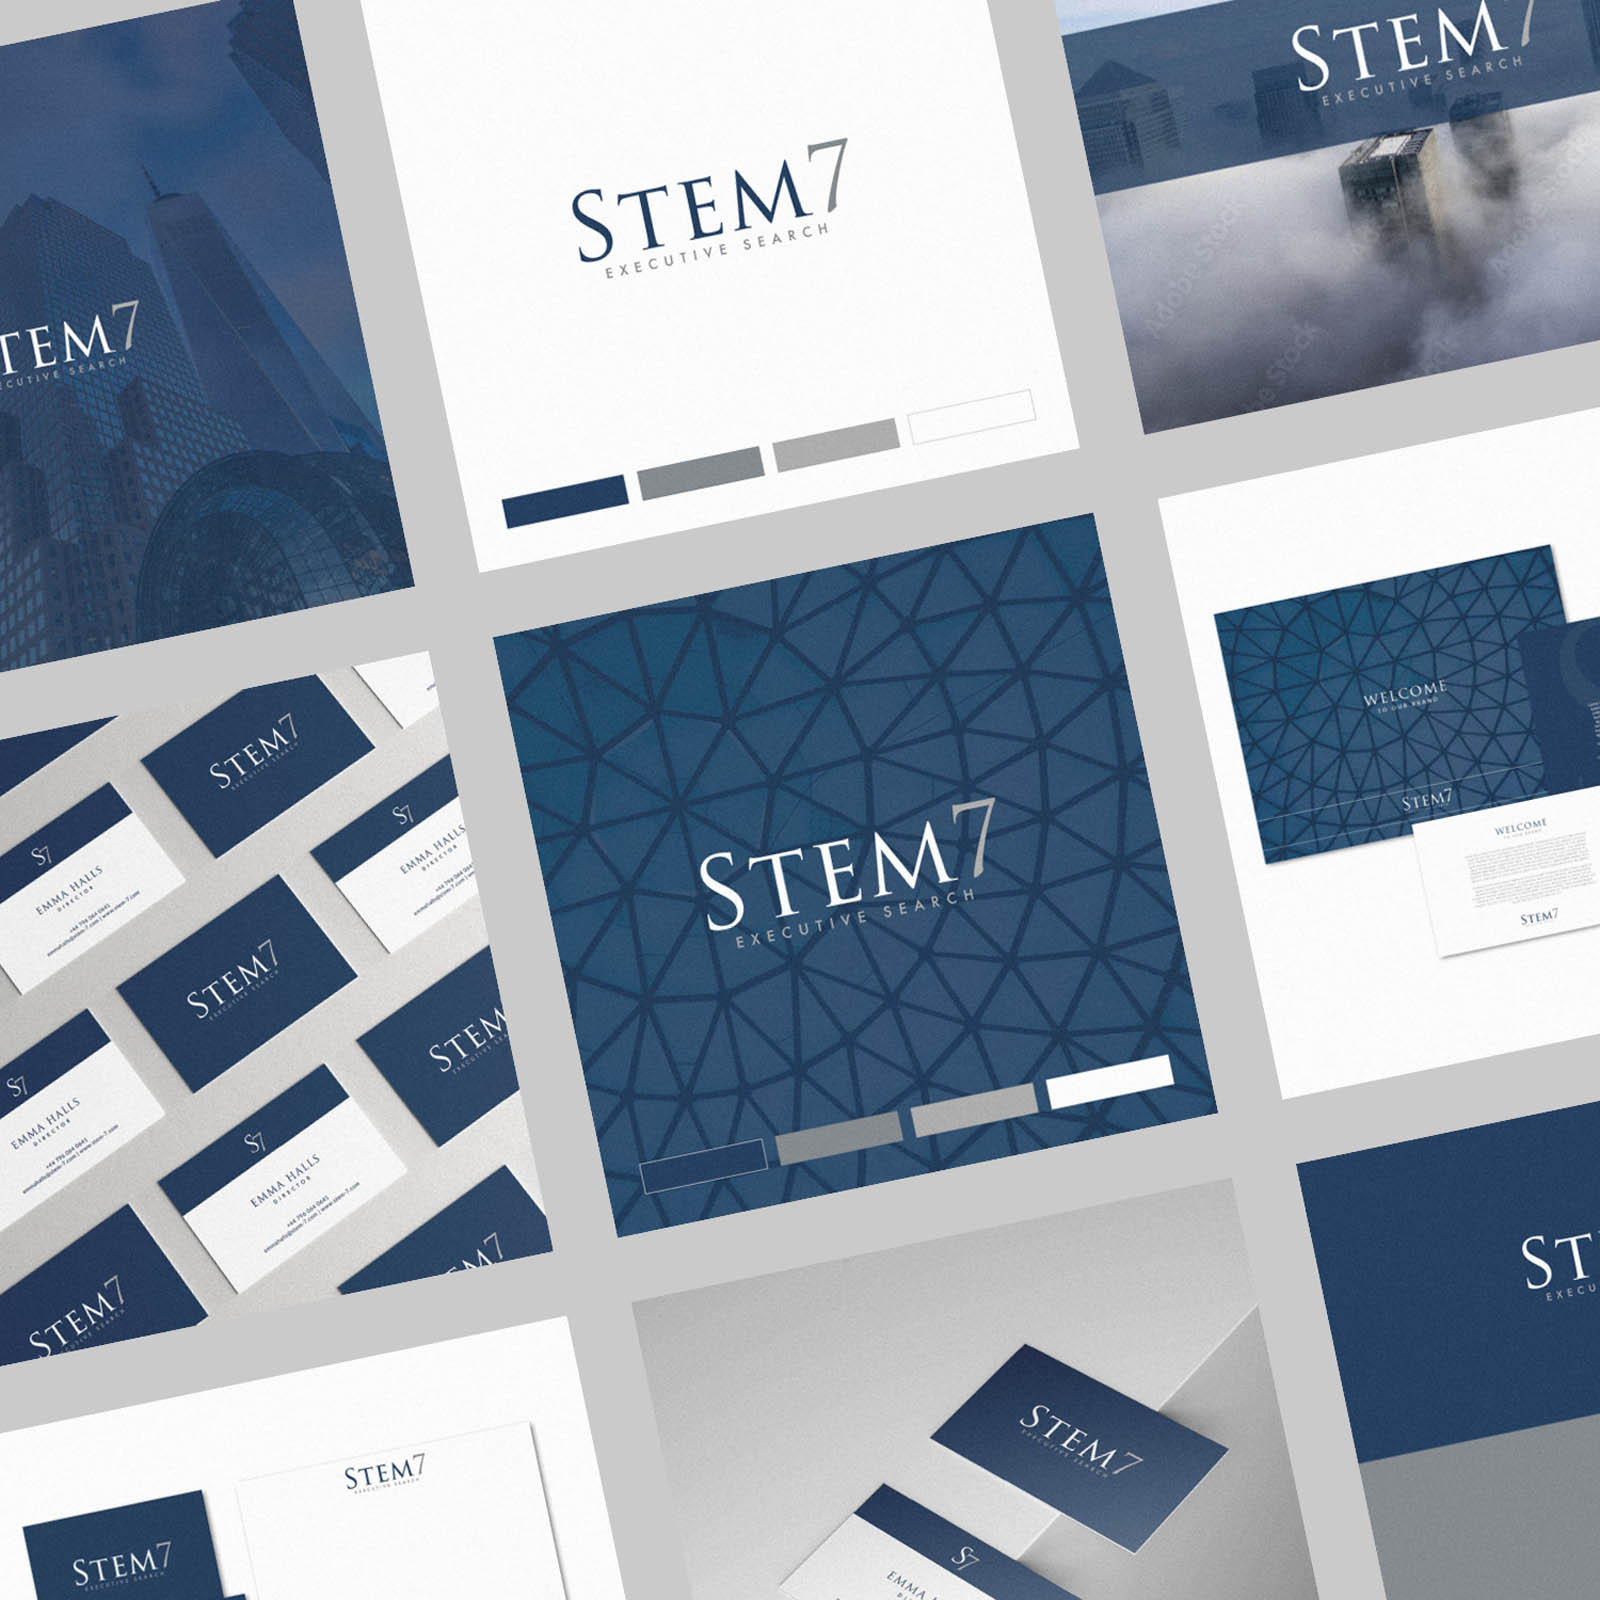 Executive Search Branding and Brand Identity Design